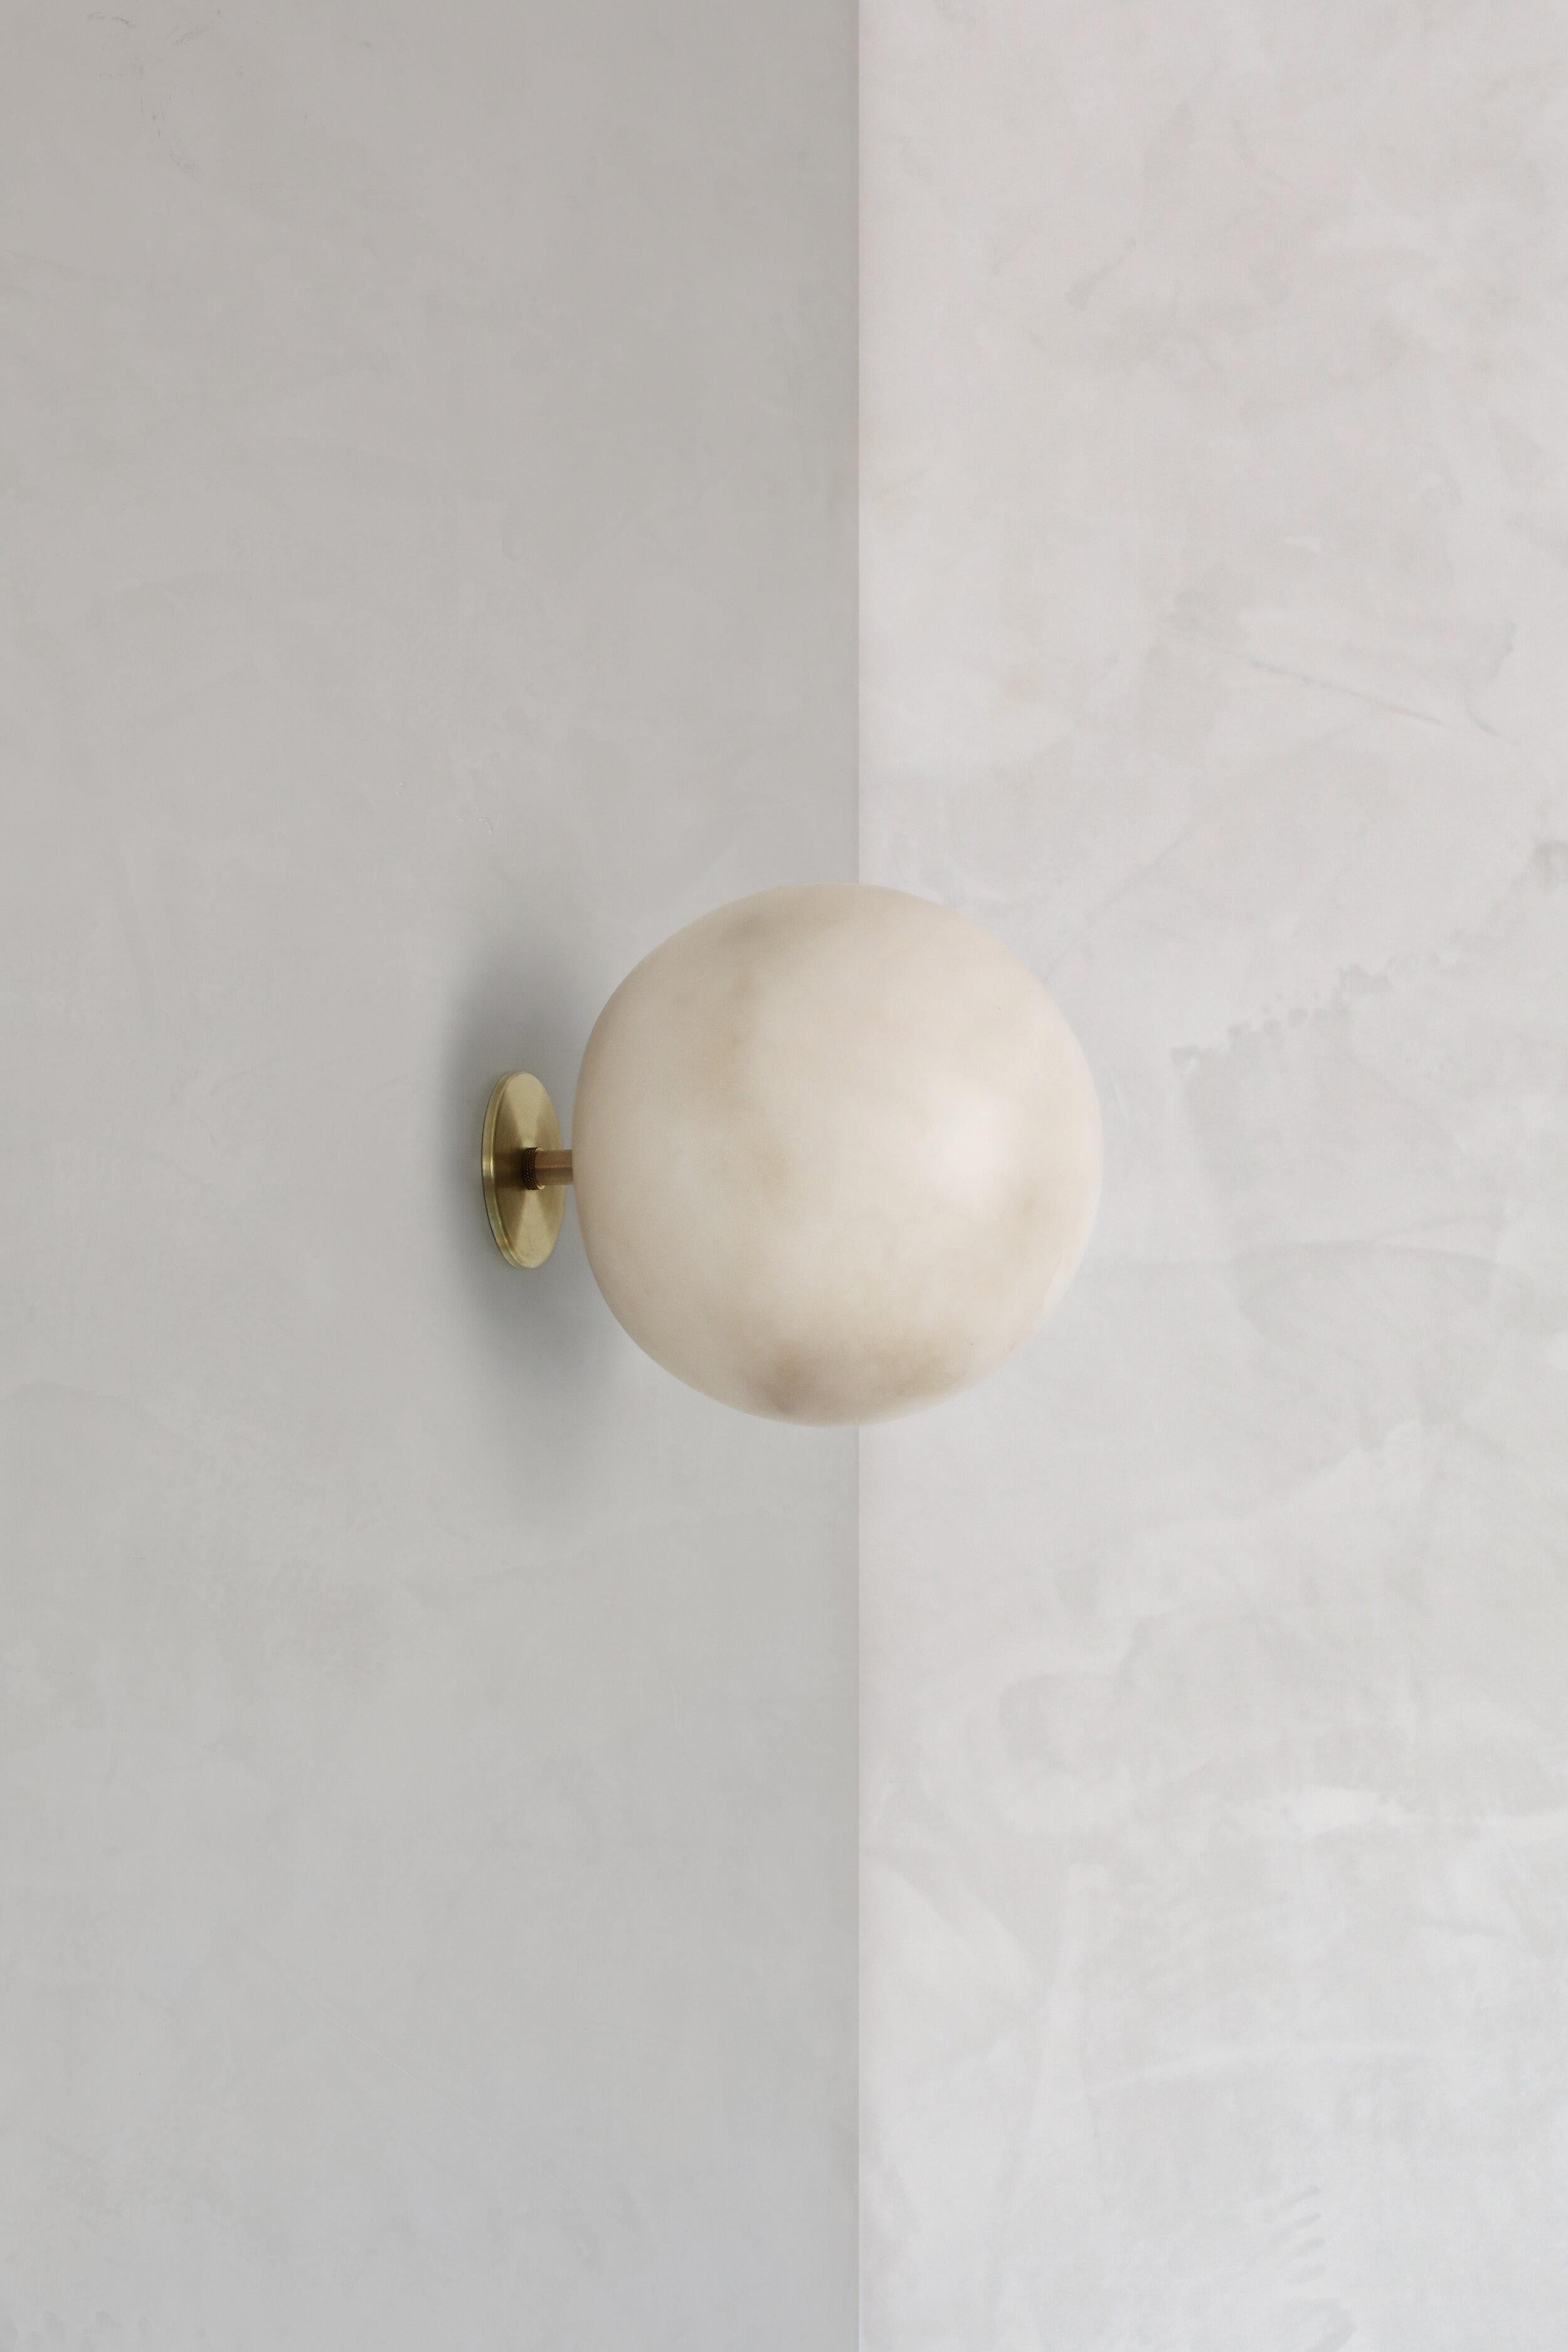 Planette wall 12 alabaster wall light by Contain.
Dimensions: D 12 x H 20 cm.
Materials: alabaster, brass
Also available in different finishes and dimensions (Ø12 cm / Ø16,5 cm / Ø18cm). 

All our lamps can be wired according to each country. If